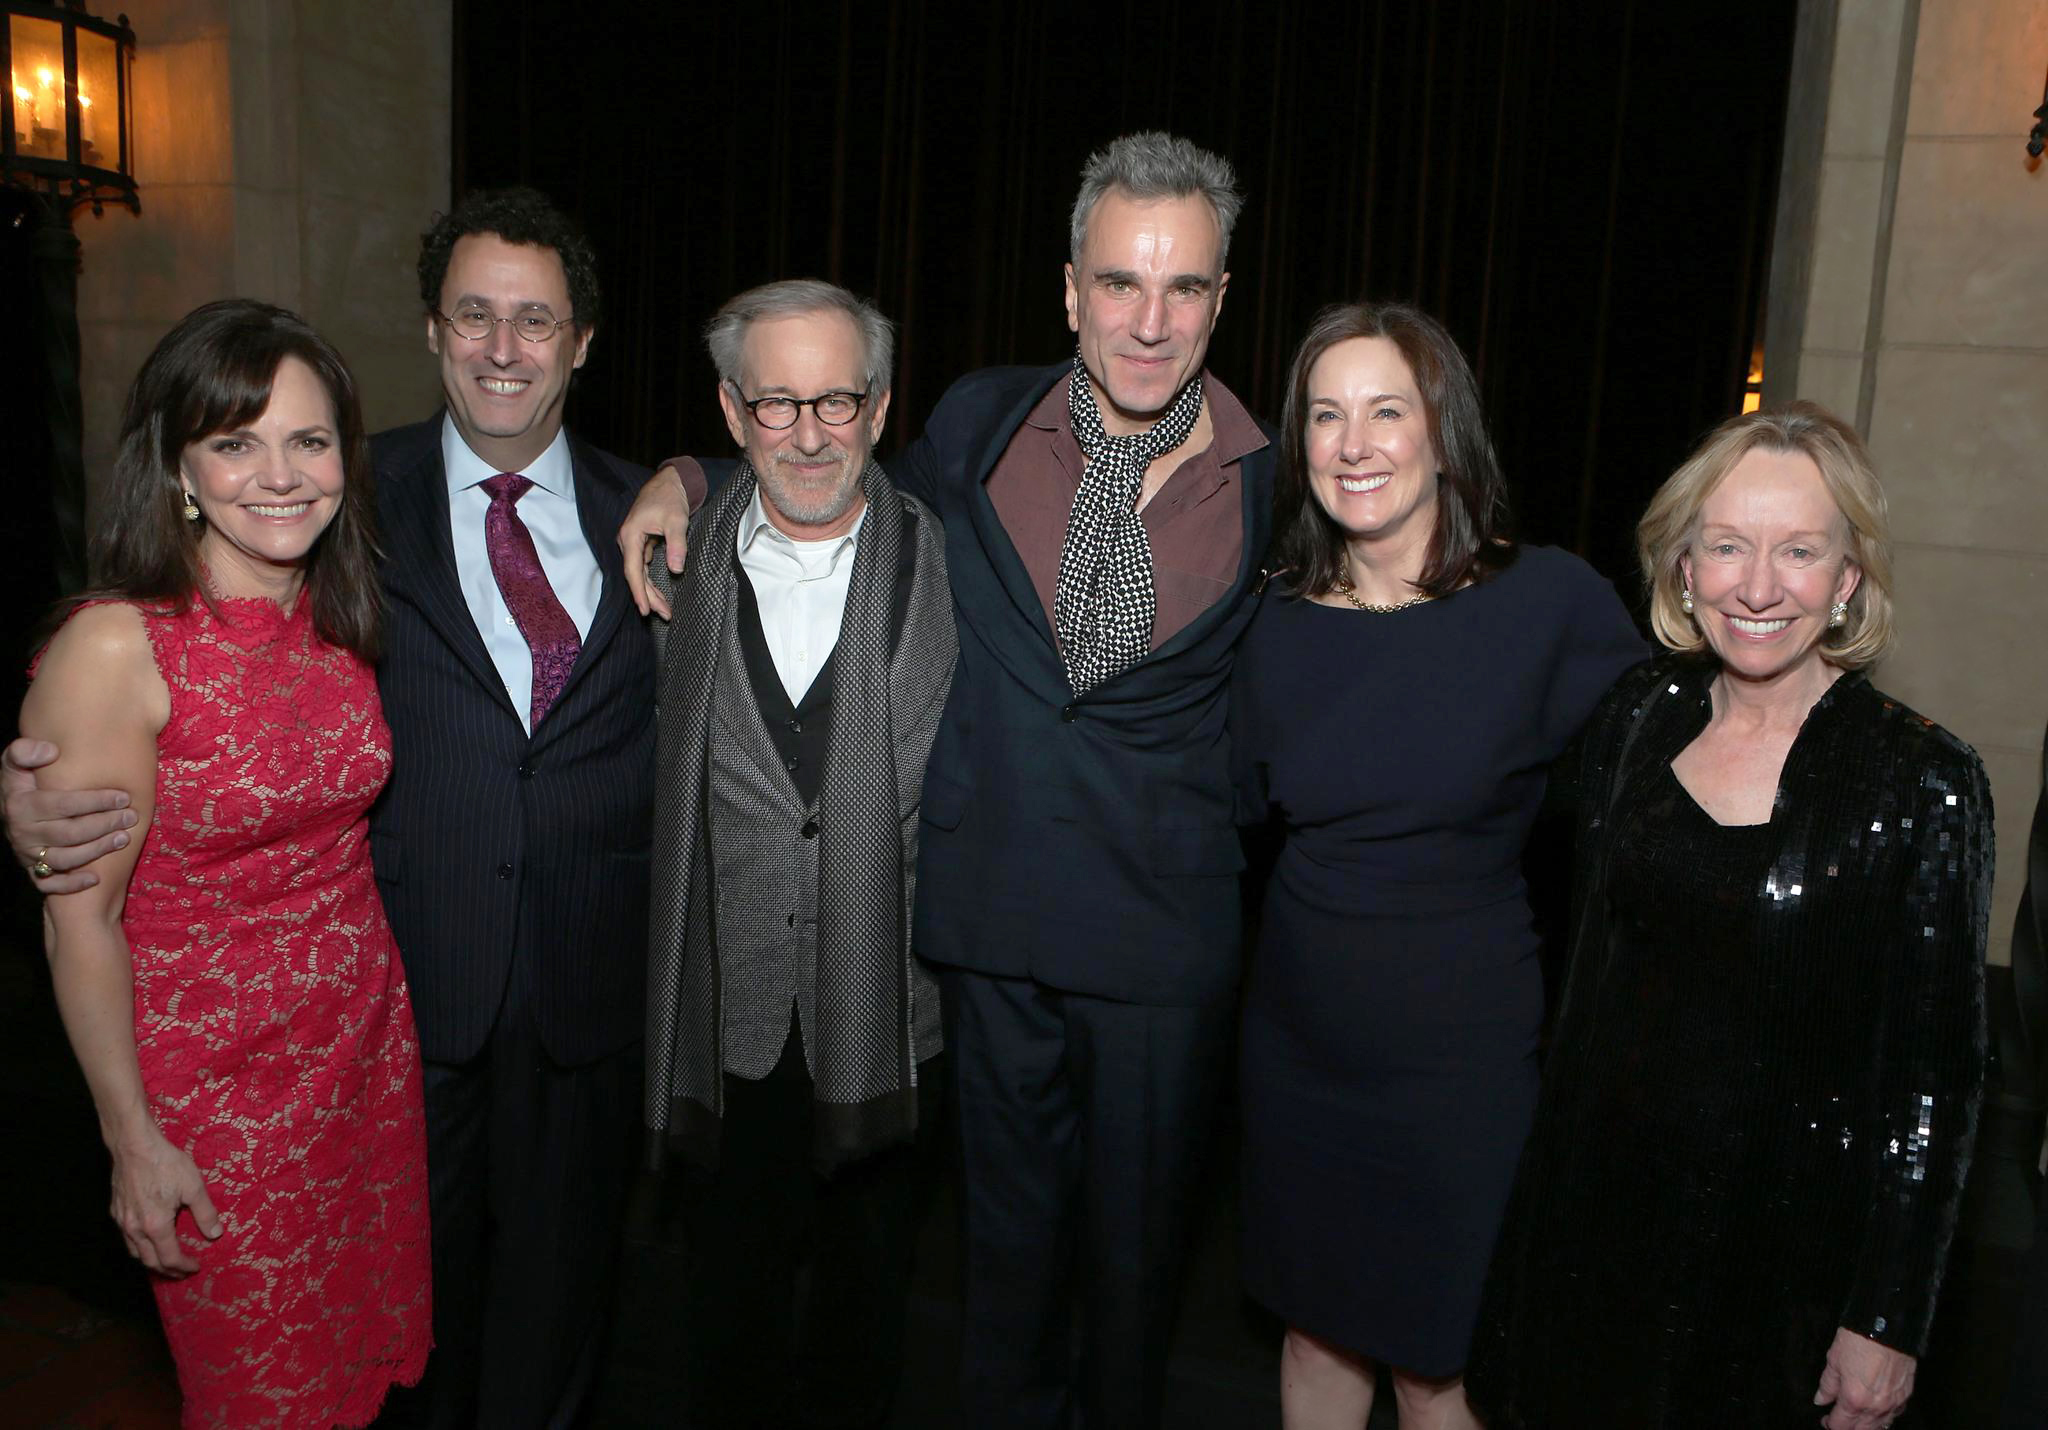 2012: Steven Spielberg, Daniel Day-Lewis, Sally Field, Kathleen Kennedy, Doris Kearns Goodwin, and Tony Kushner at a screening of Steven Spielberg's film "Lincoln" at the Ziegfeld Theatre. Goodwin won the 2005 Lincoln Prize (for the best book about the American Civil War) for "Team of Rivals: The Political Genius of Abraham Lincoln," a book about Abraham Lincoln's presidential cabinet. Part of the book was adapted by Tony Kushner into the screenplay for Steven Spielberg's 2012 film "Lincoln."